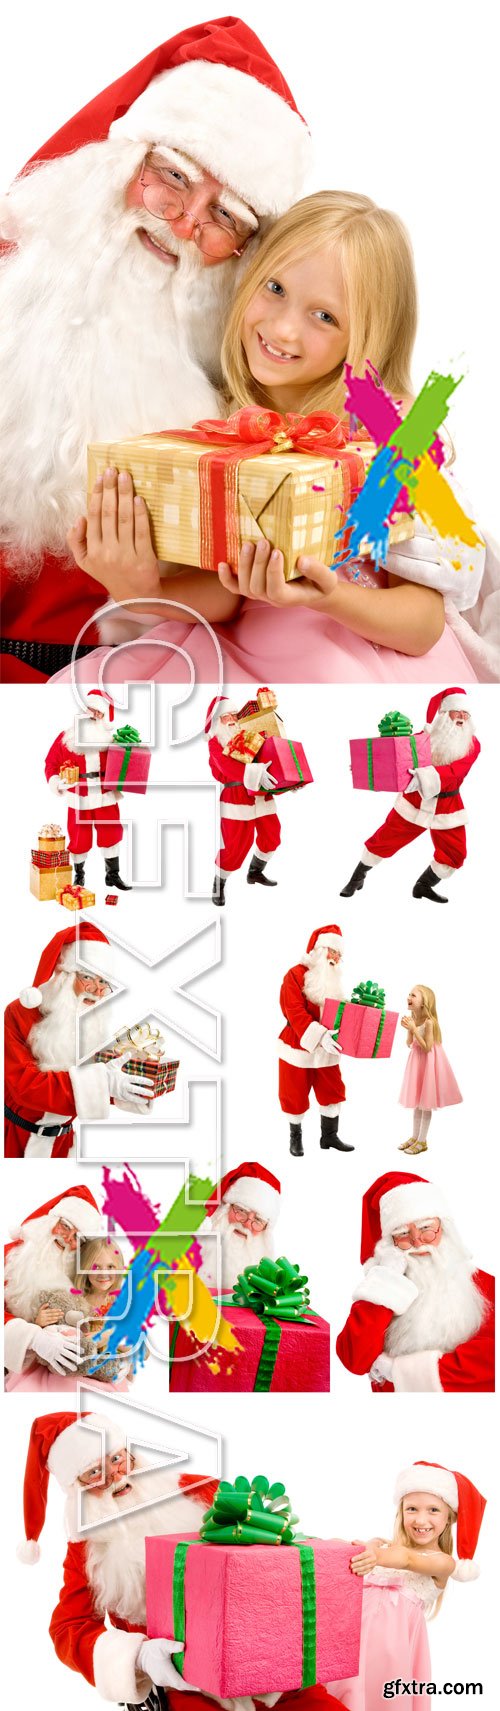 Santa Claus with a little girl, Christmas gifts - Stock photo